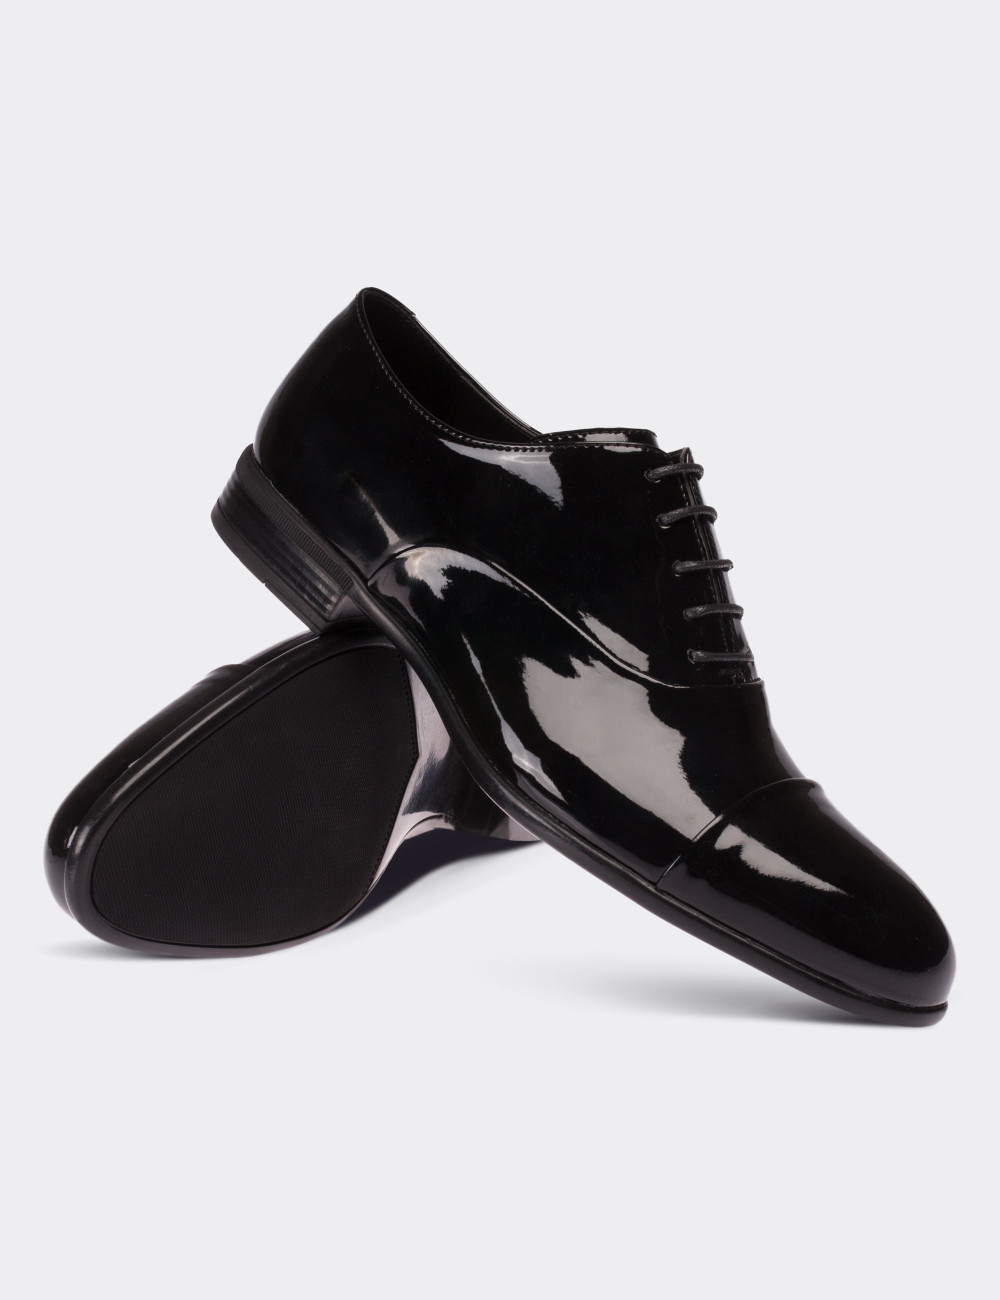 Black Patent Leather Classic Shoes - 01026MSYHC01